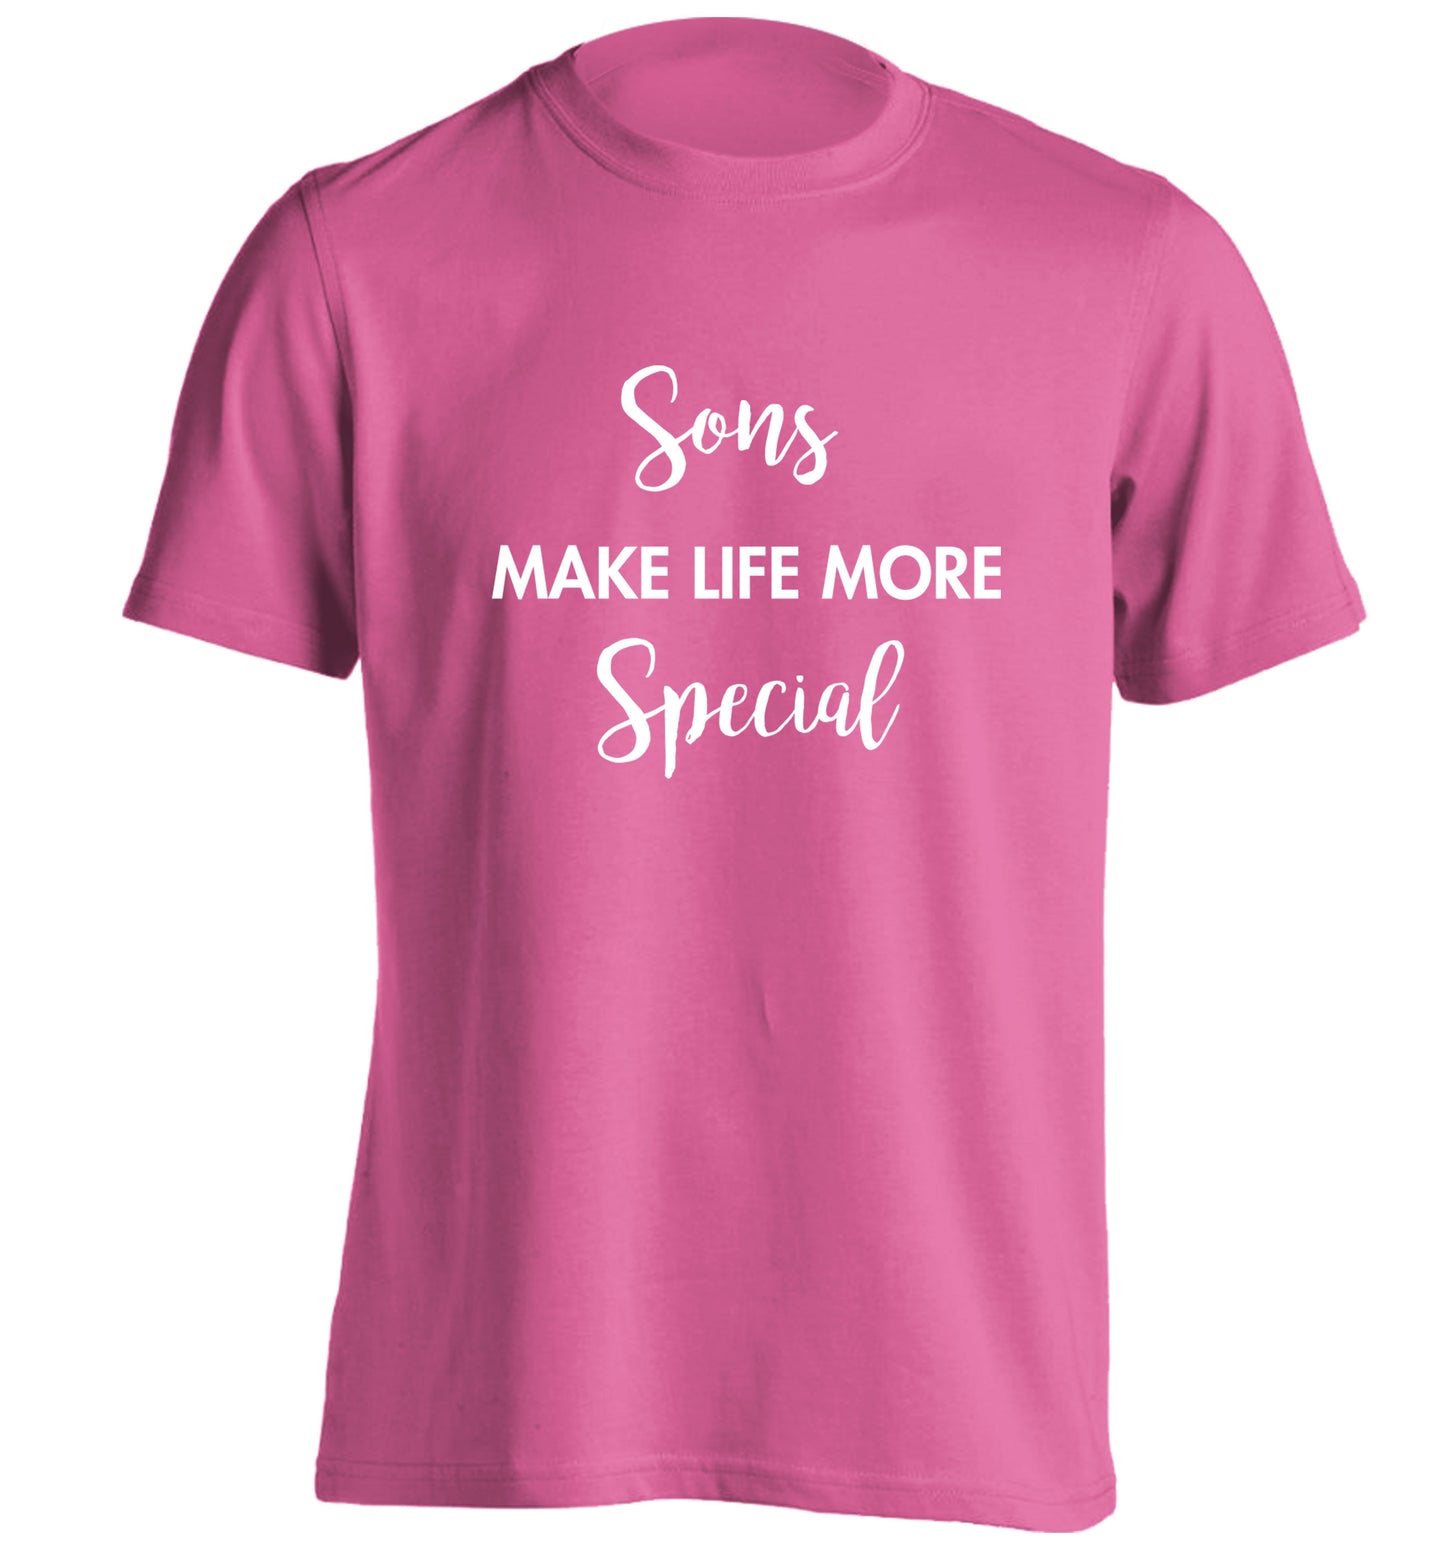 Sons make life more special adults unisex pink Tshirt 2XL